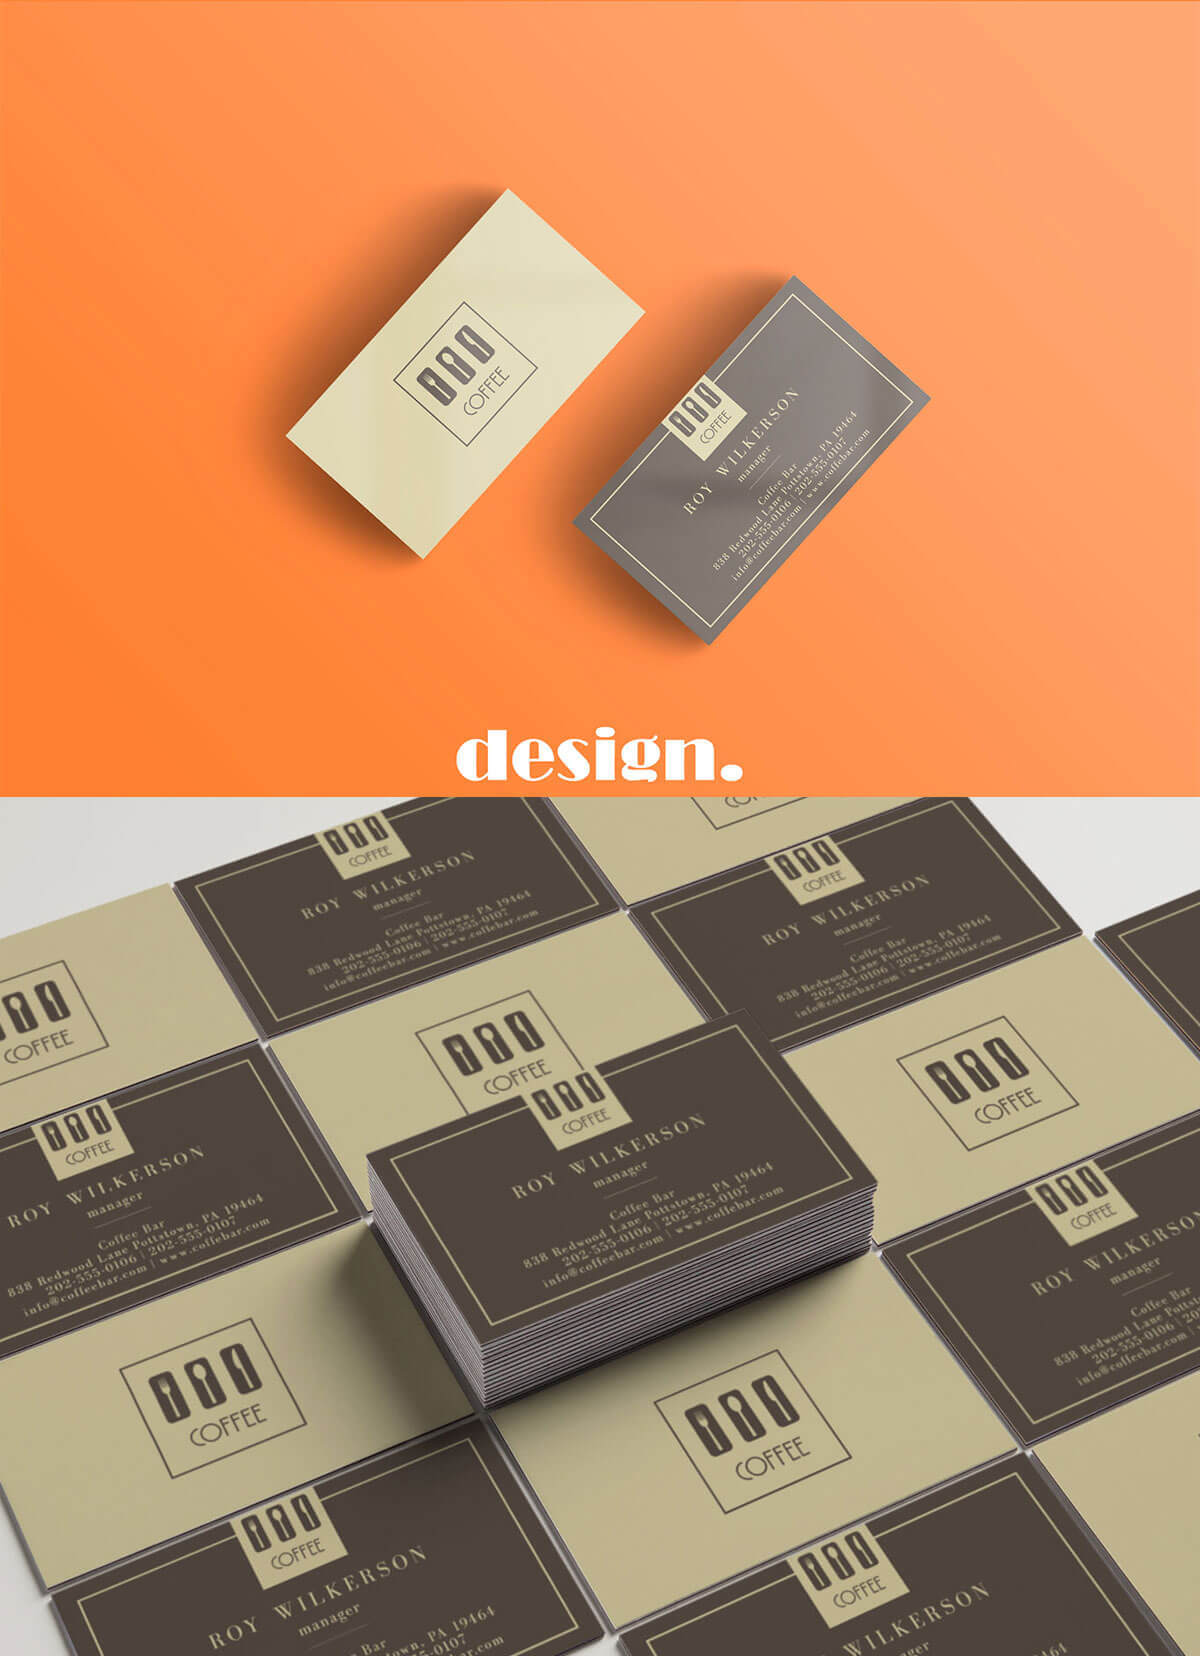 Free Coffee Business Card Template – Creativetacos In Coffee Business Card Template Free